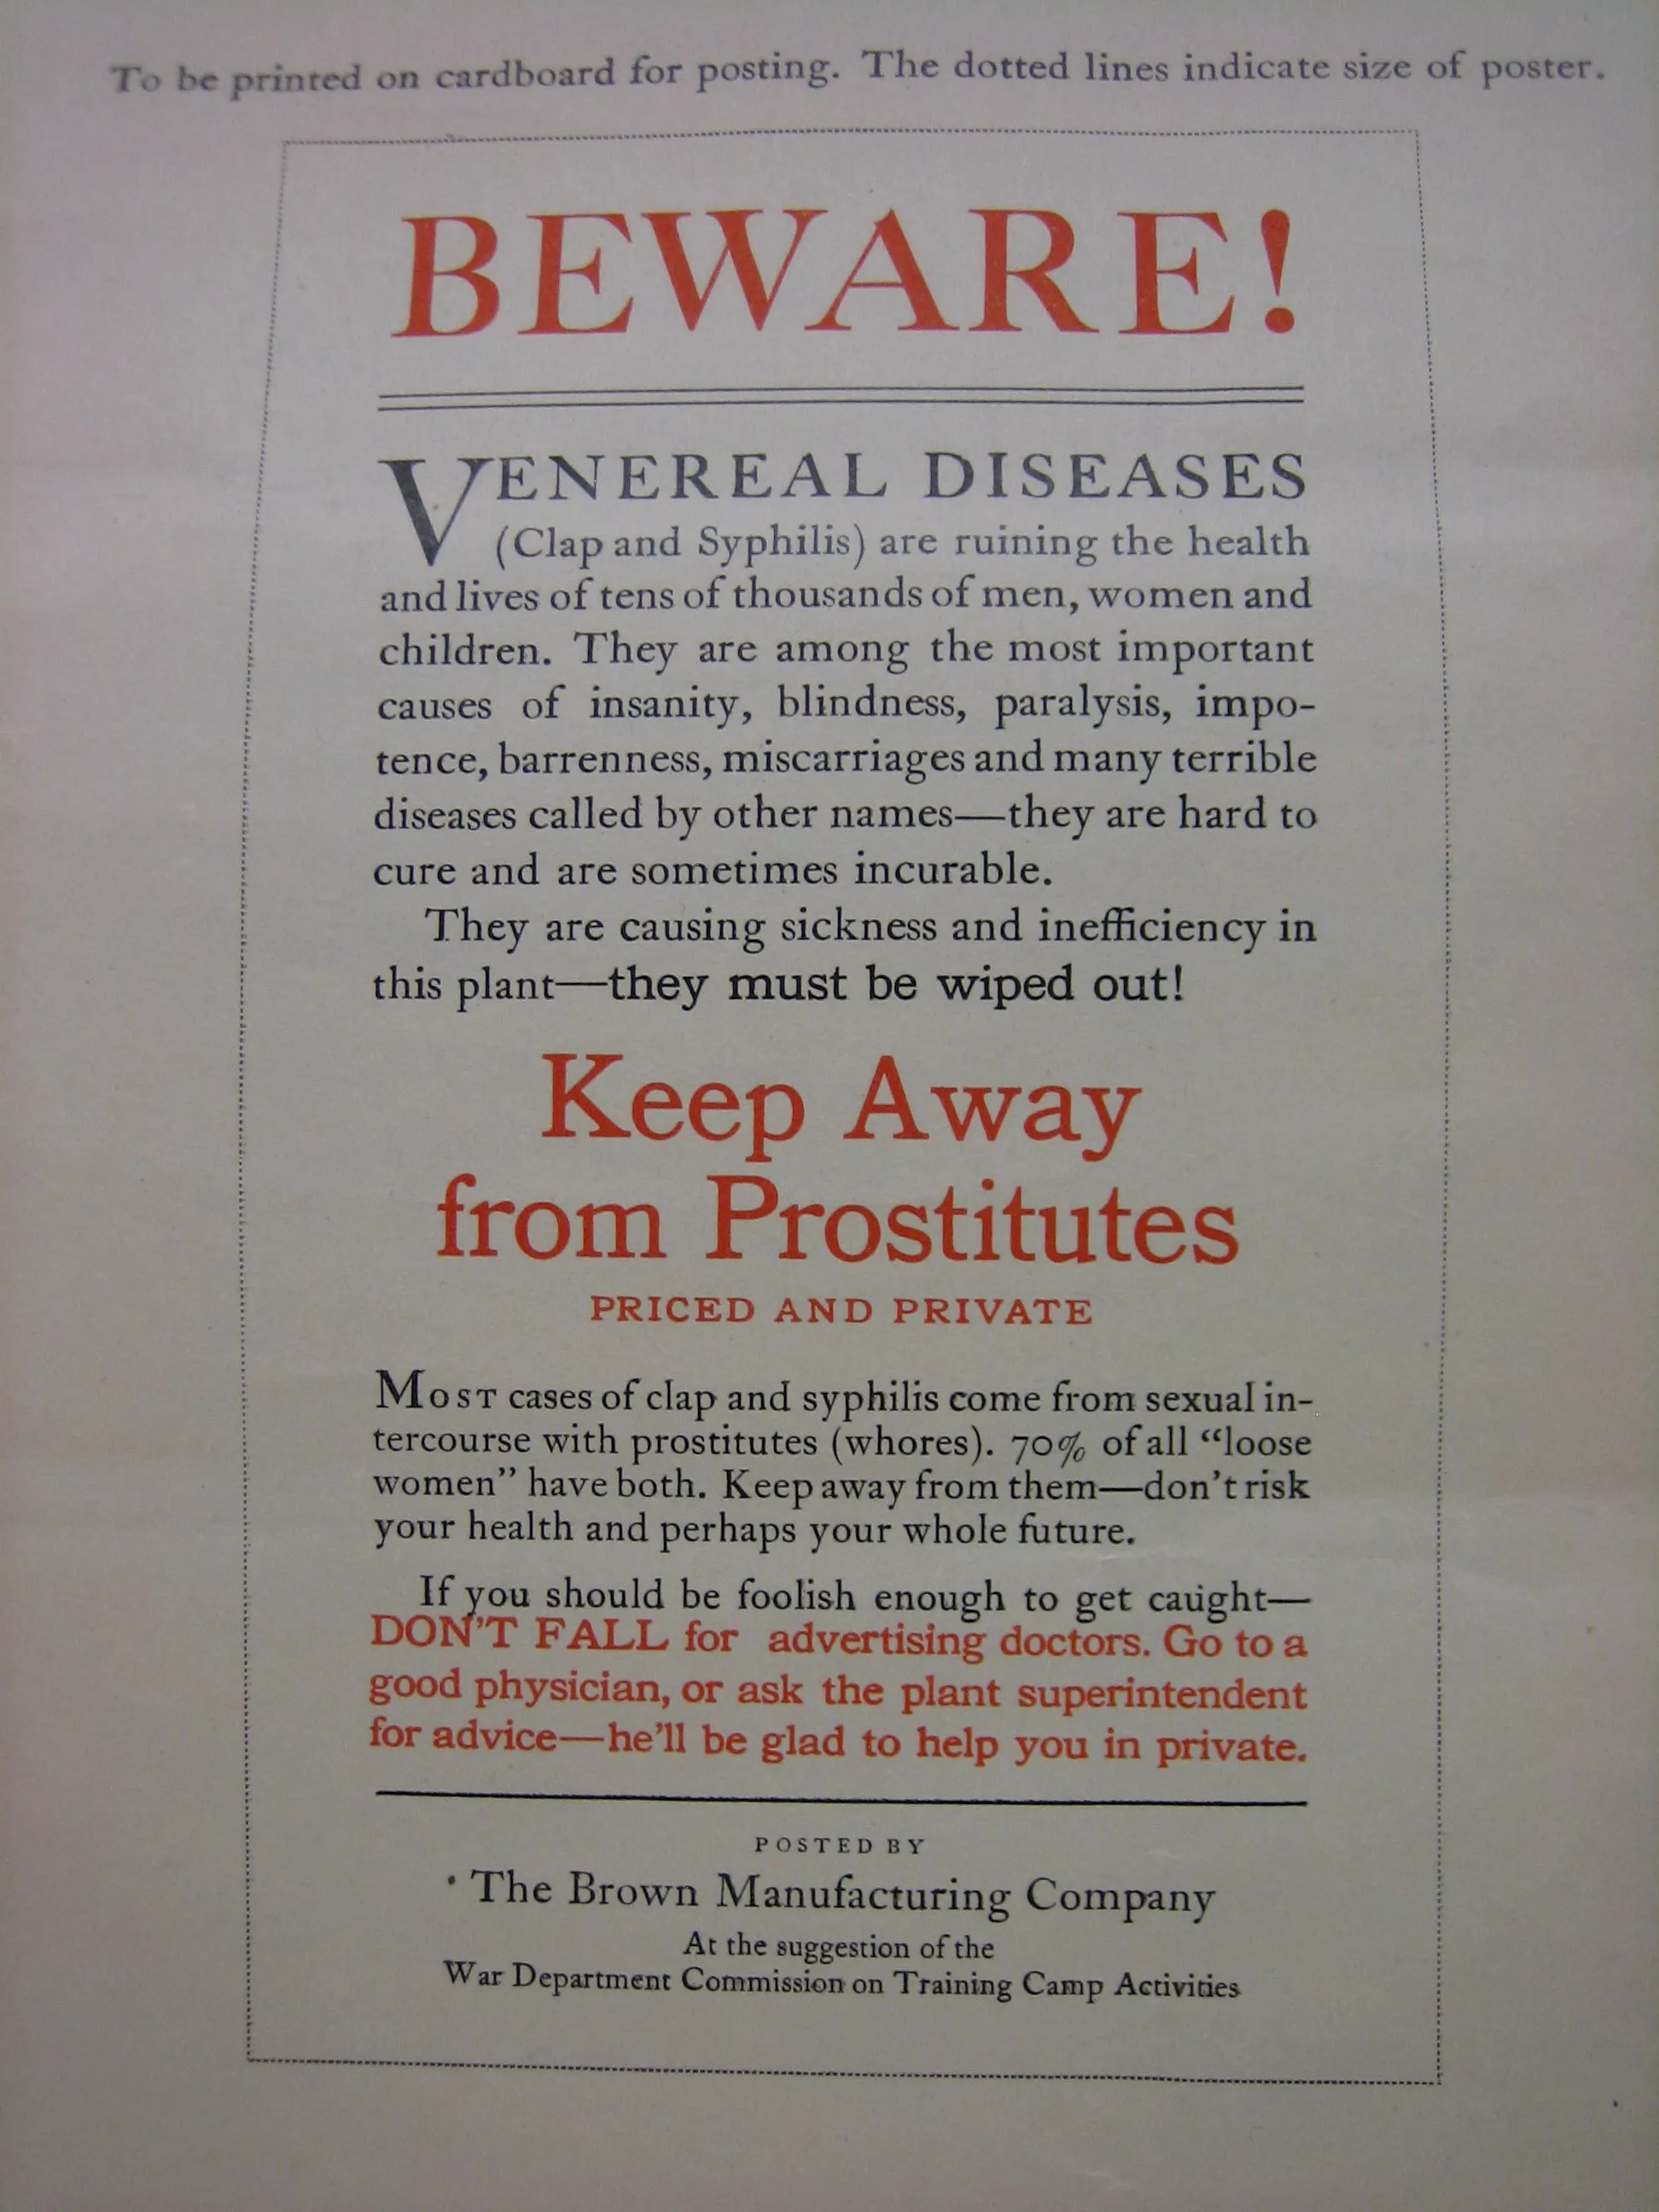 government propaganda sent to corporations to post as part of the "war against prostitution" during wwi, archival document from the university of idaho library's special collections (potlatch papers)